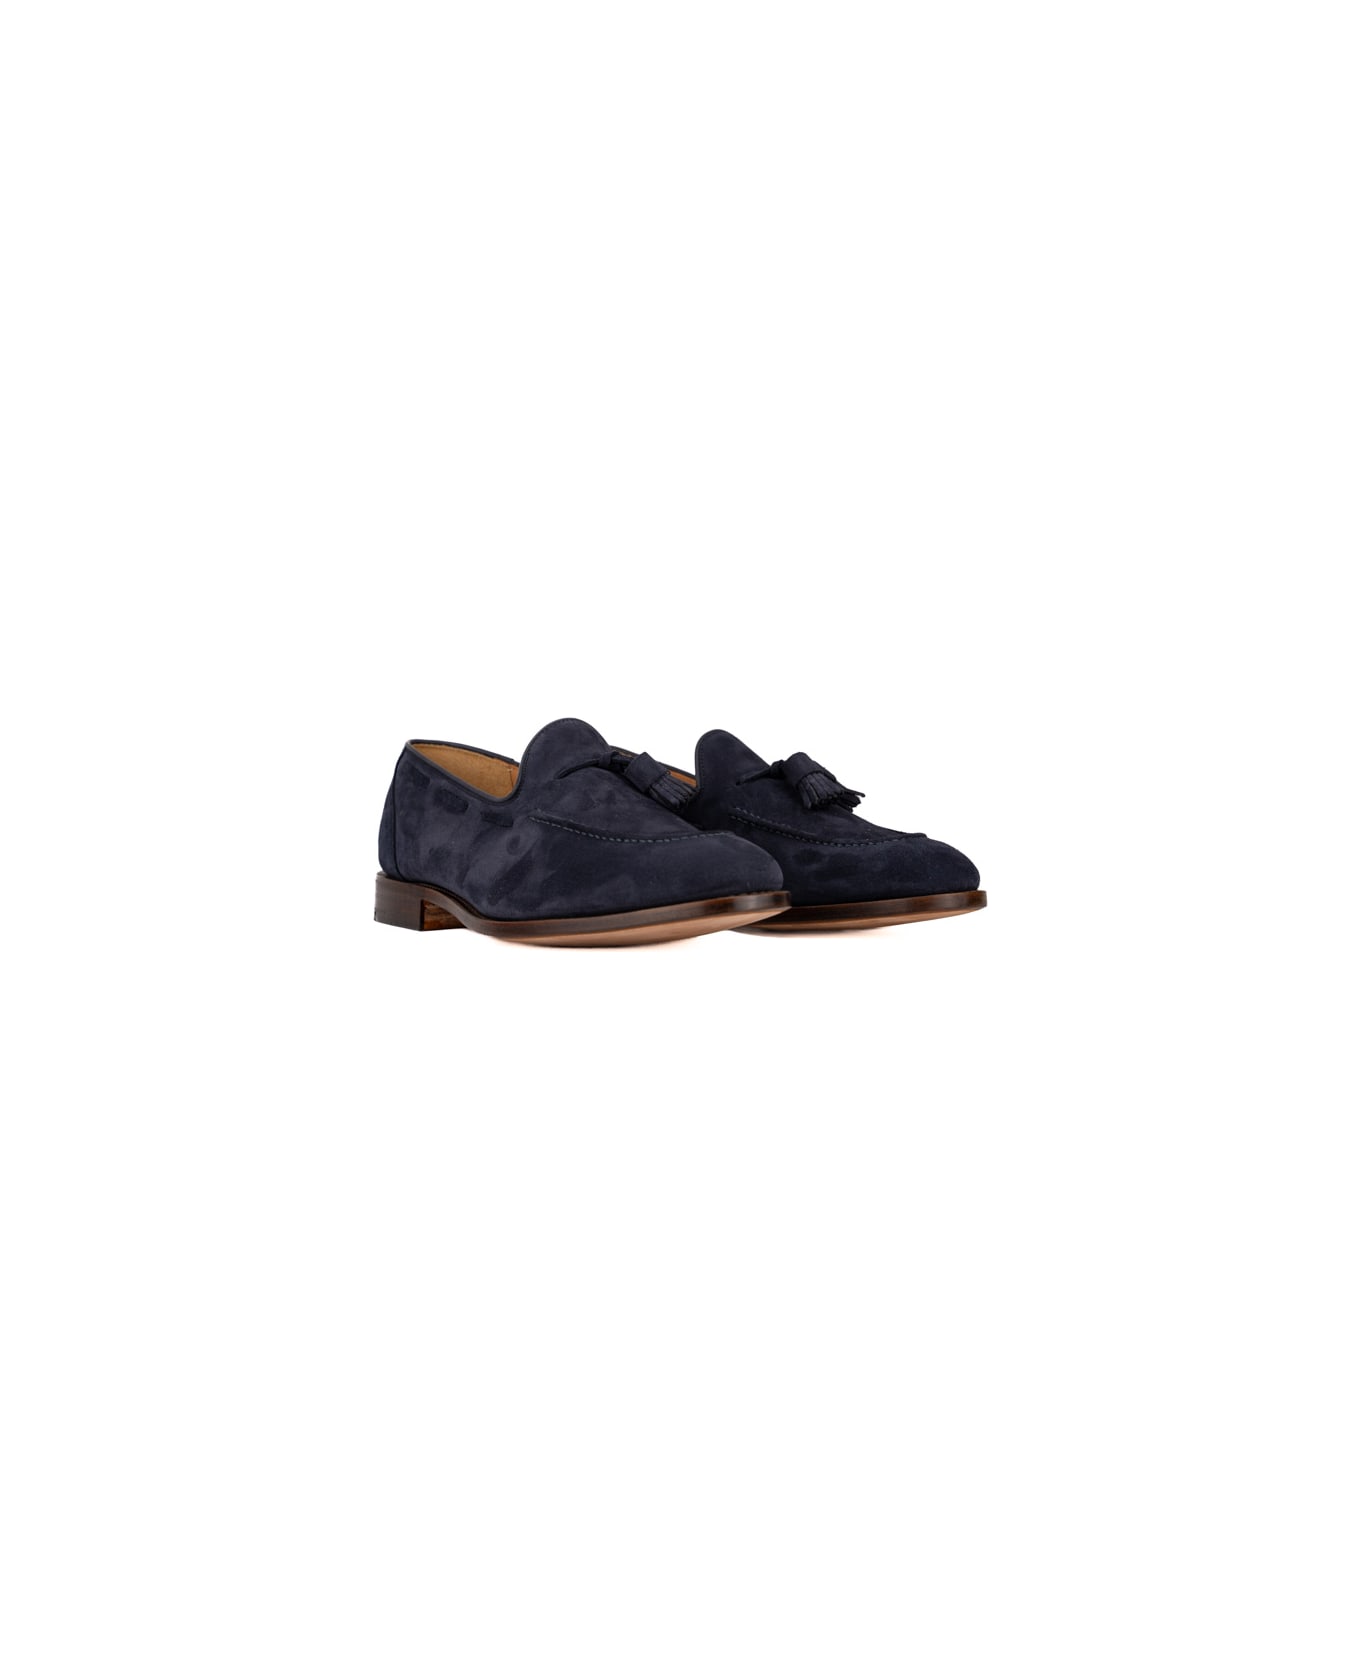 Church's Blue Suede Loafers With Tassels - Navy